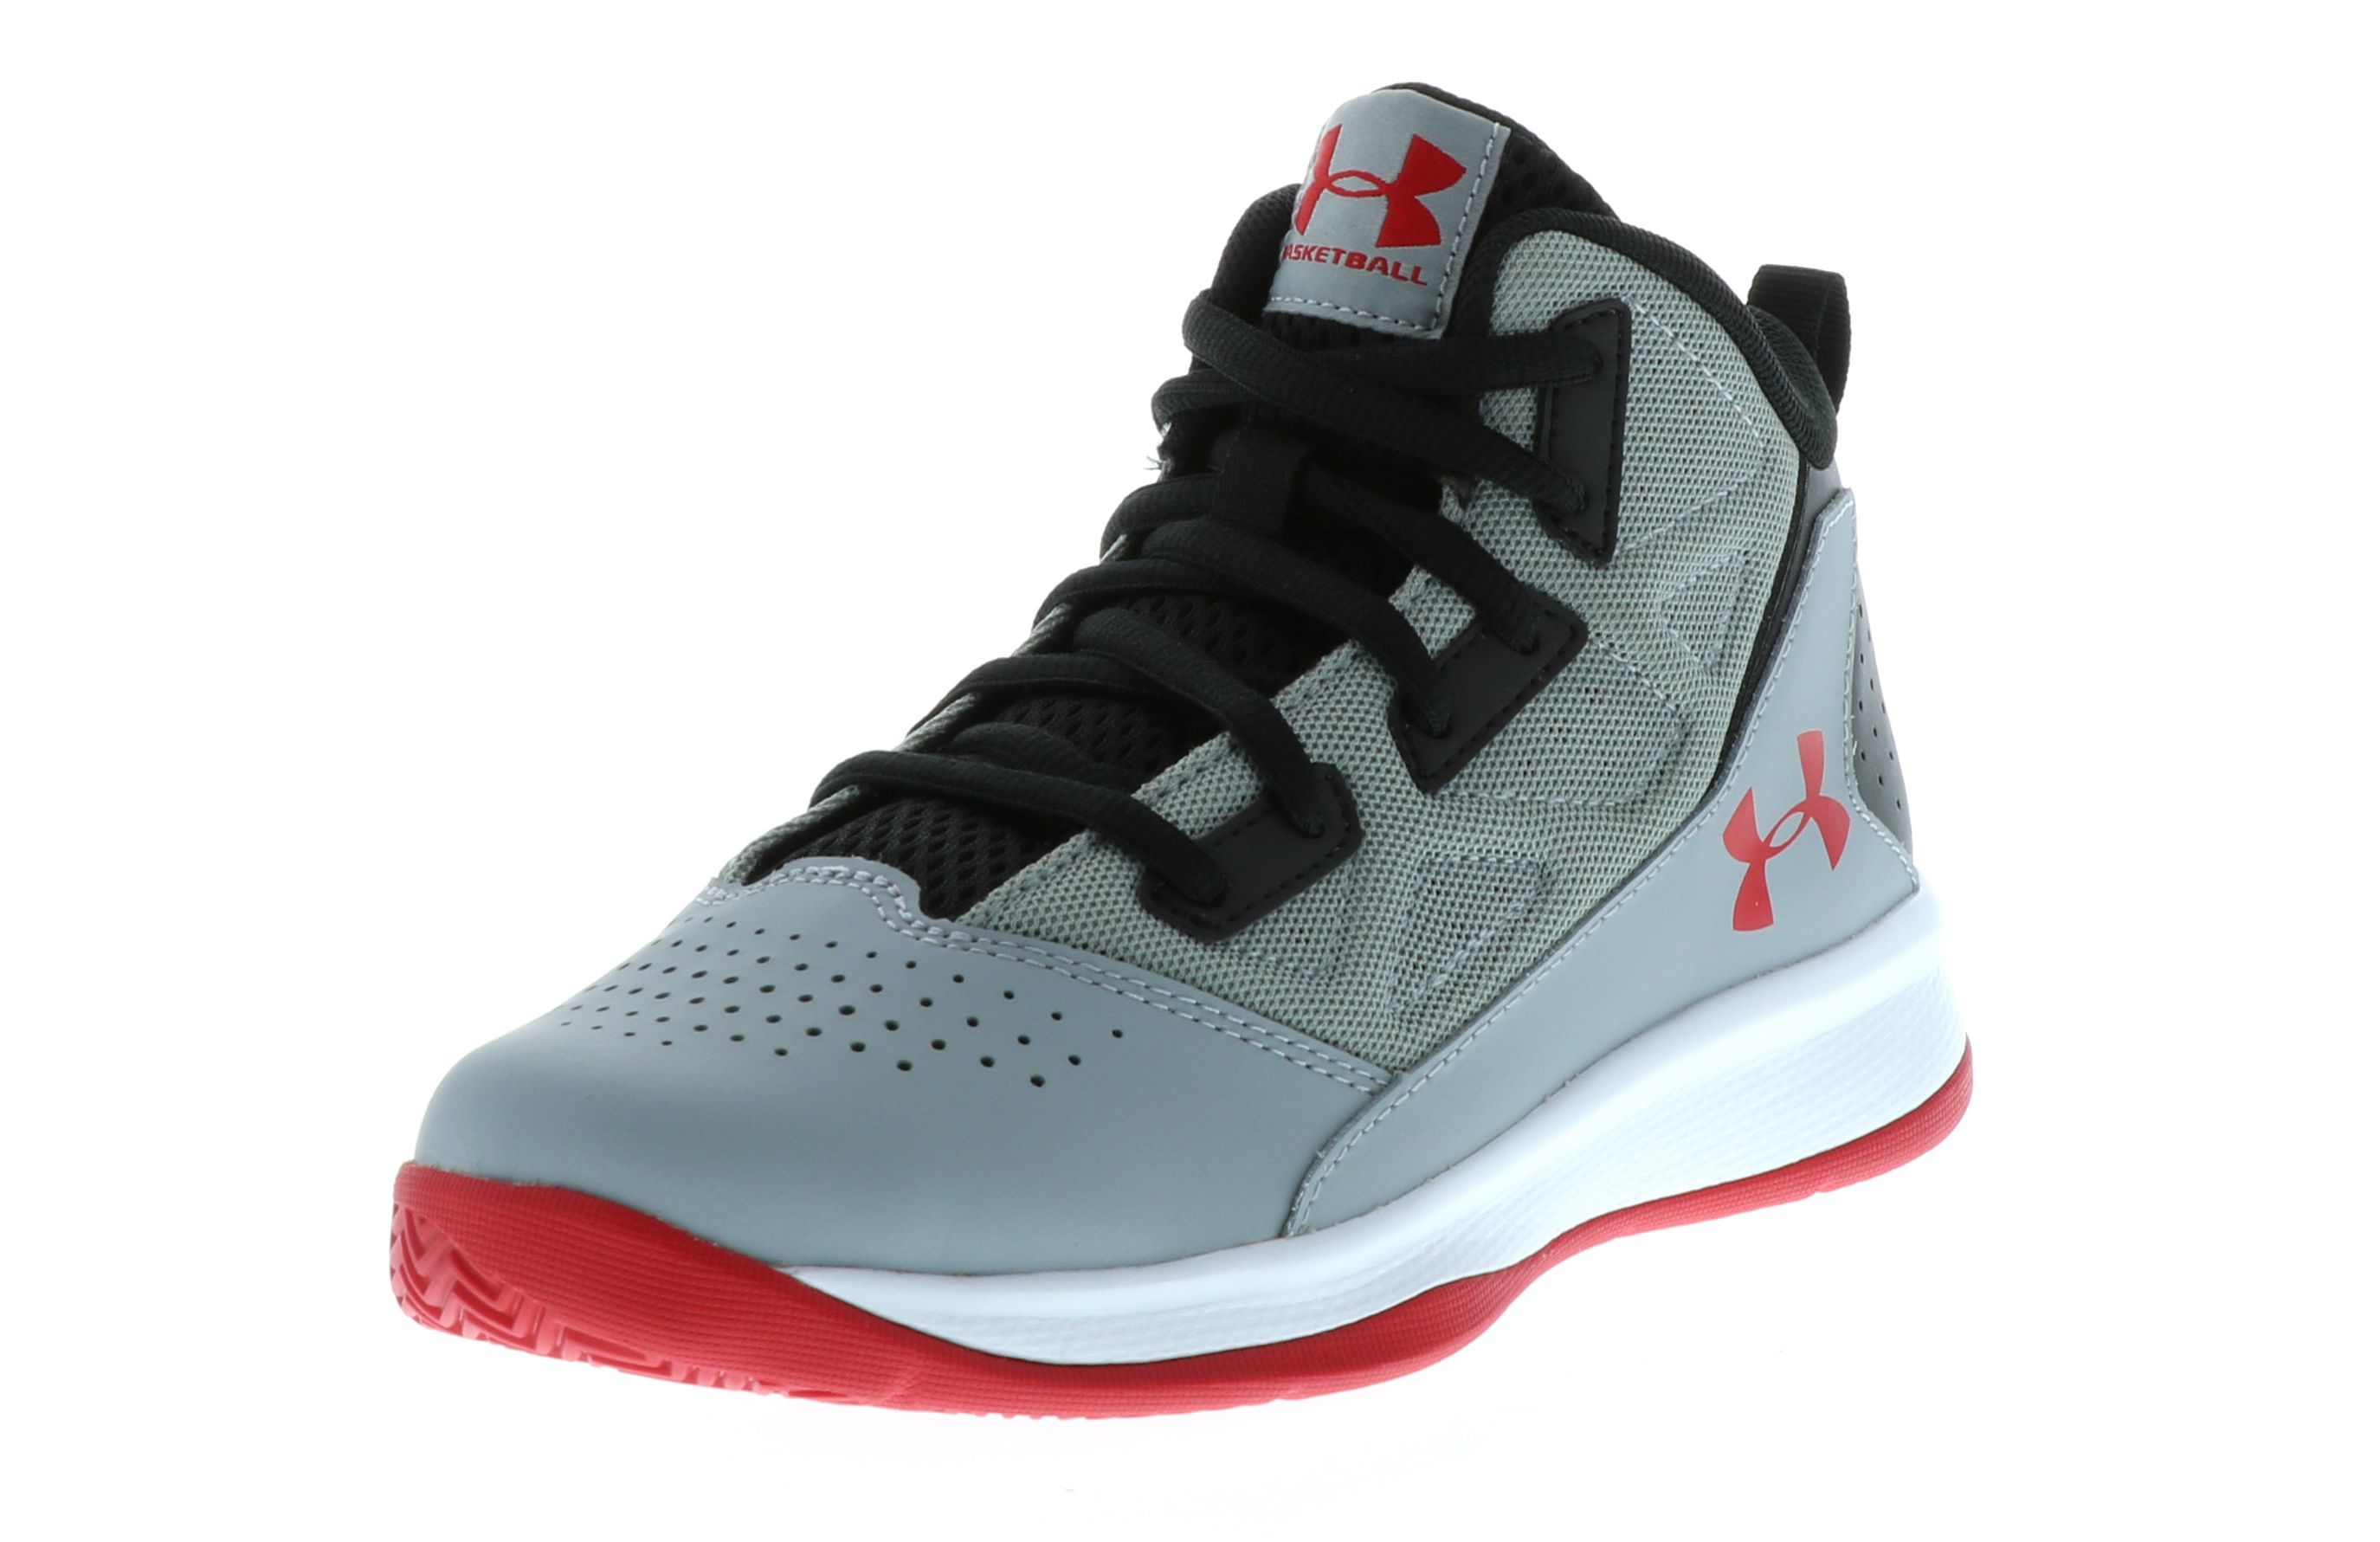 under armour jet mid basketball shoes review